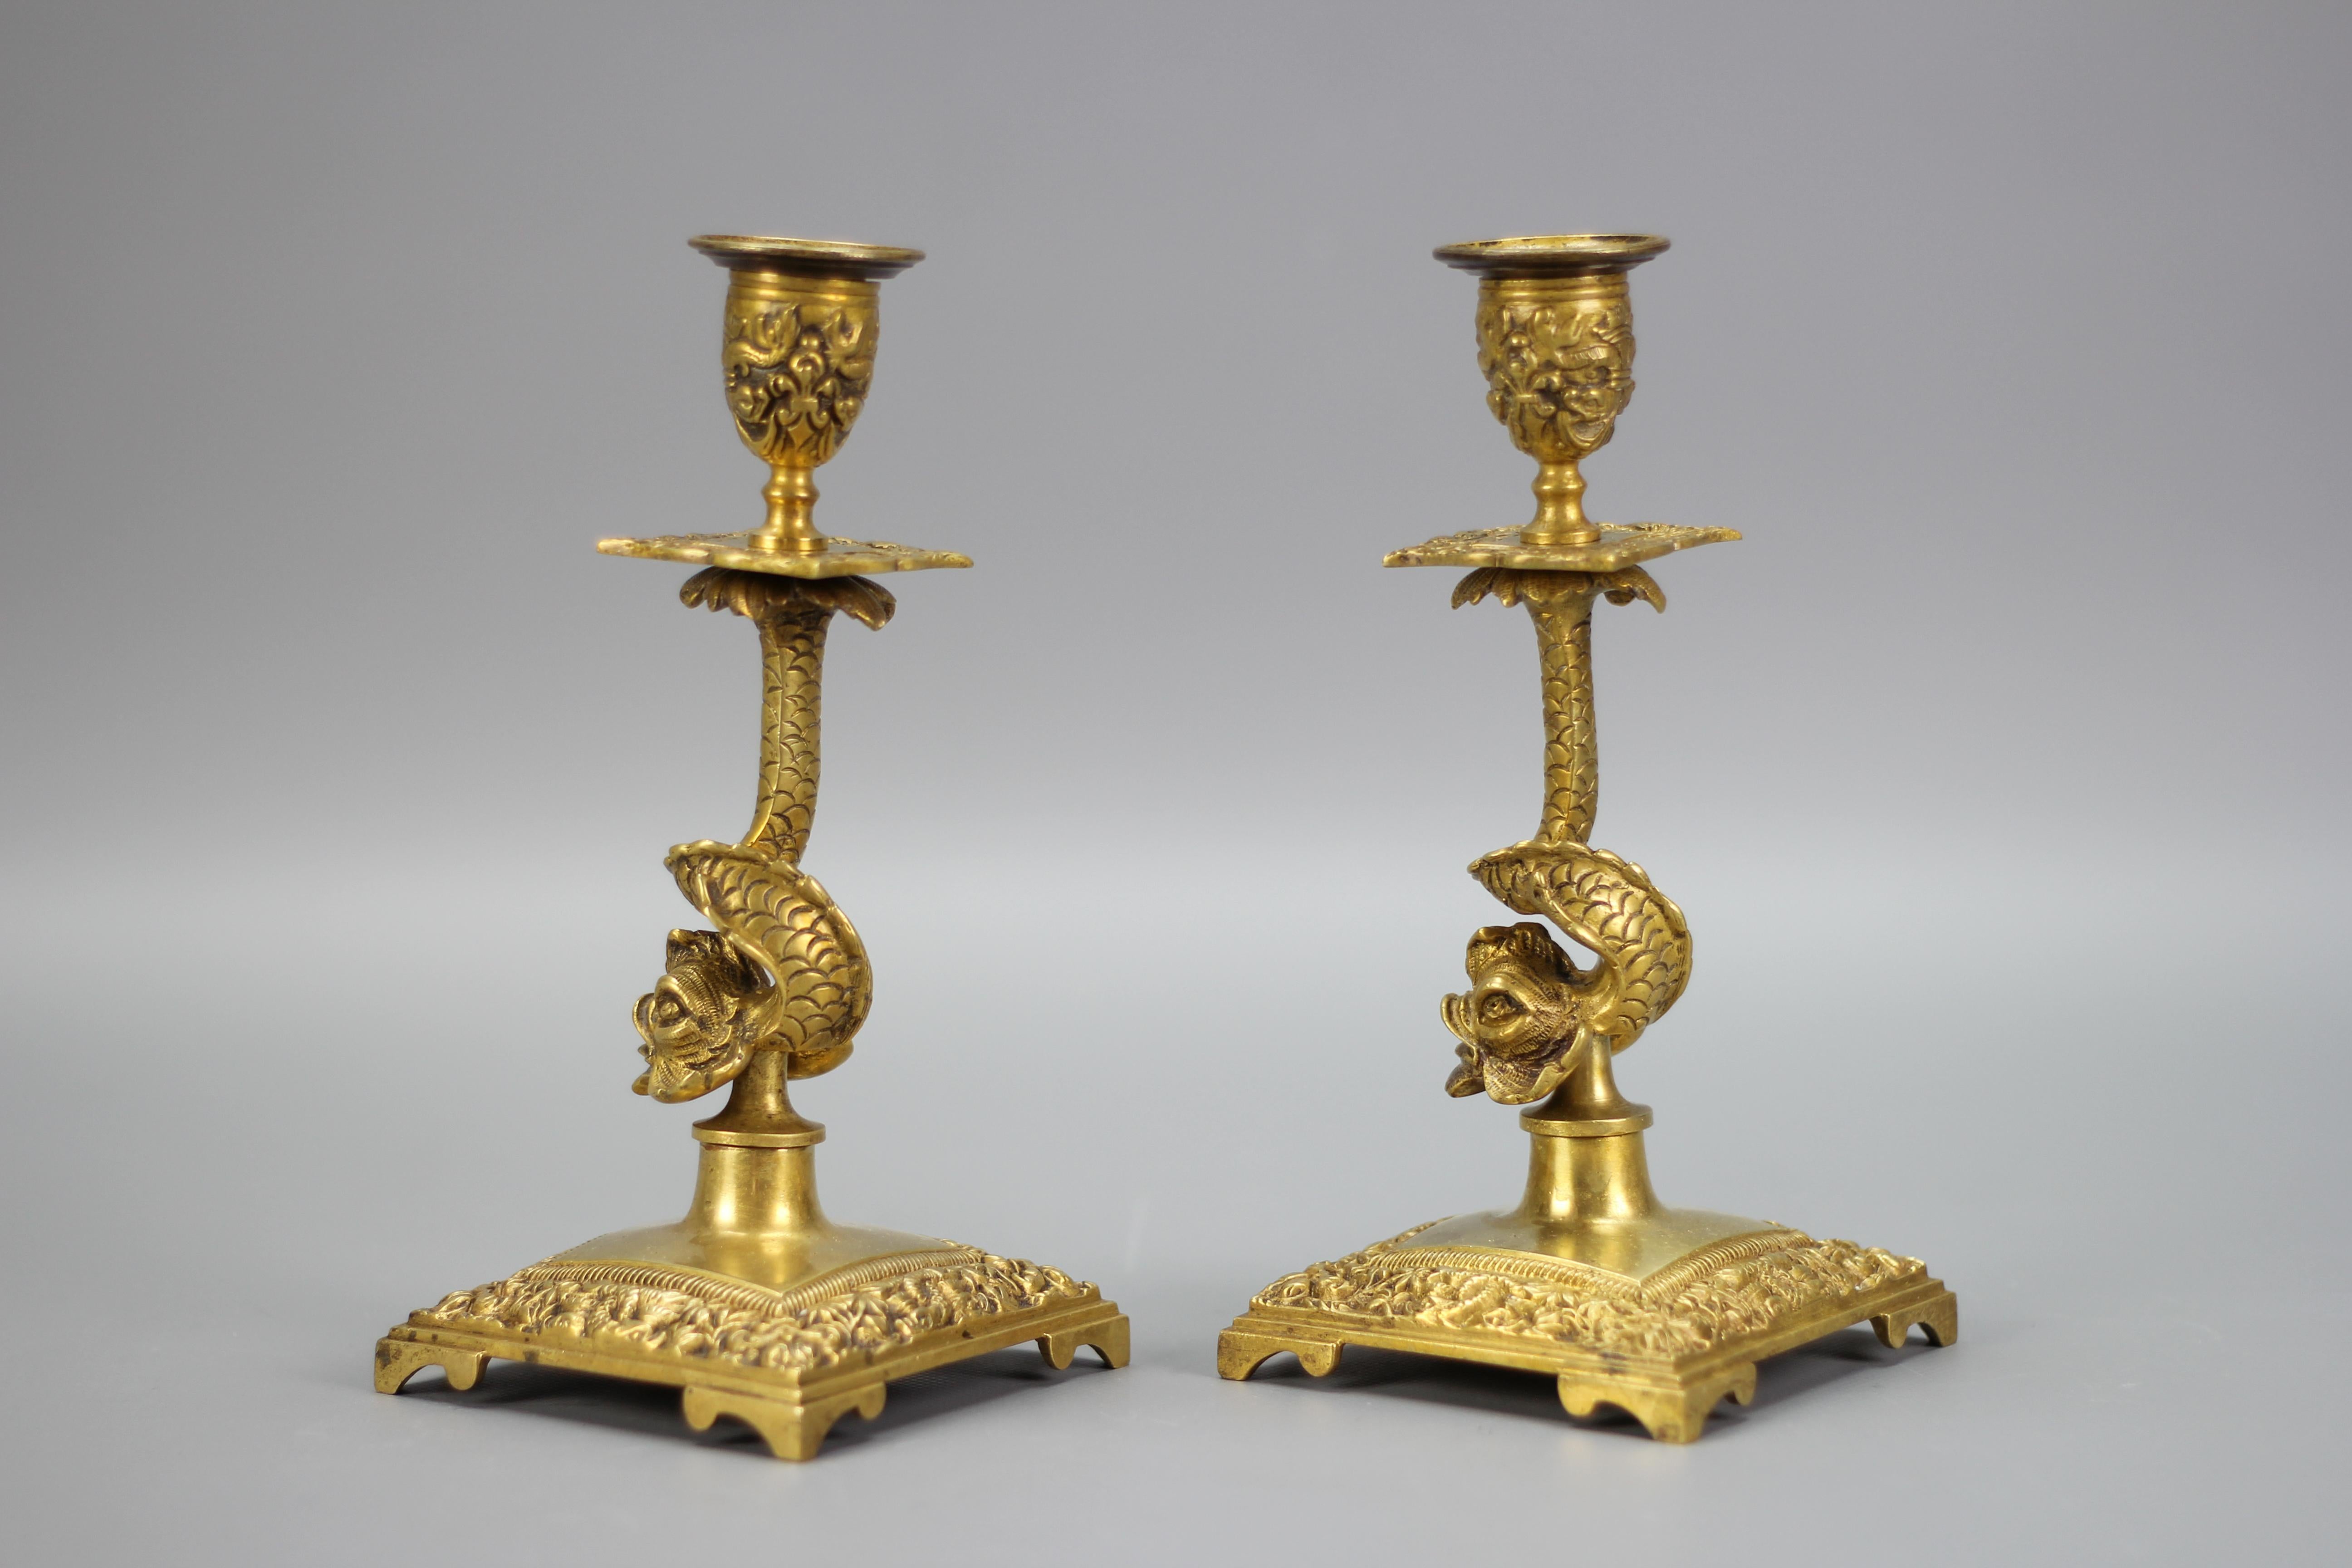 A pair of candle holders made of bronze, France, circa the 1930s.
These beautiful bronze candlesticks each feature column in the form of a dolphin. The square bases, wax pans, and sconces or capitals are richly ornate with foliate and dolphin